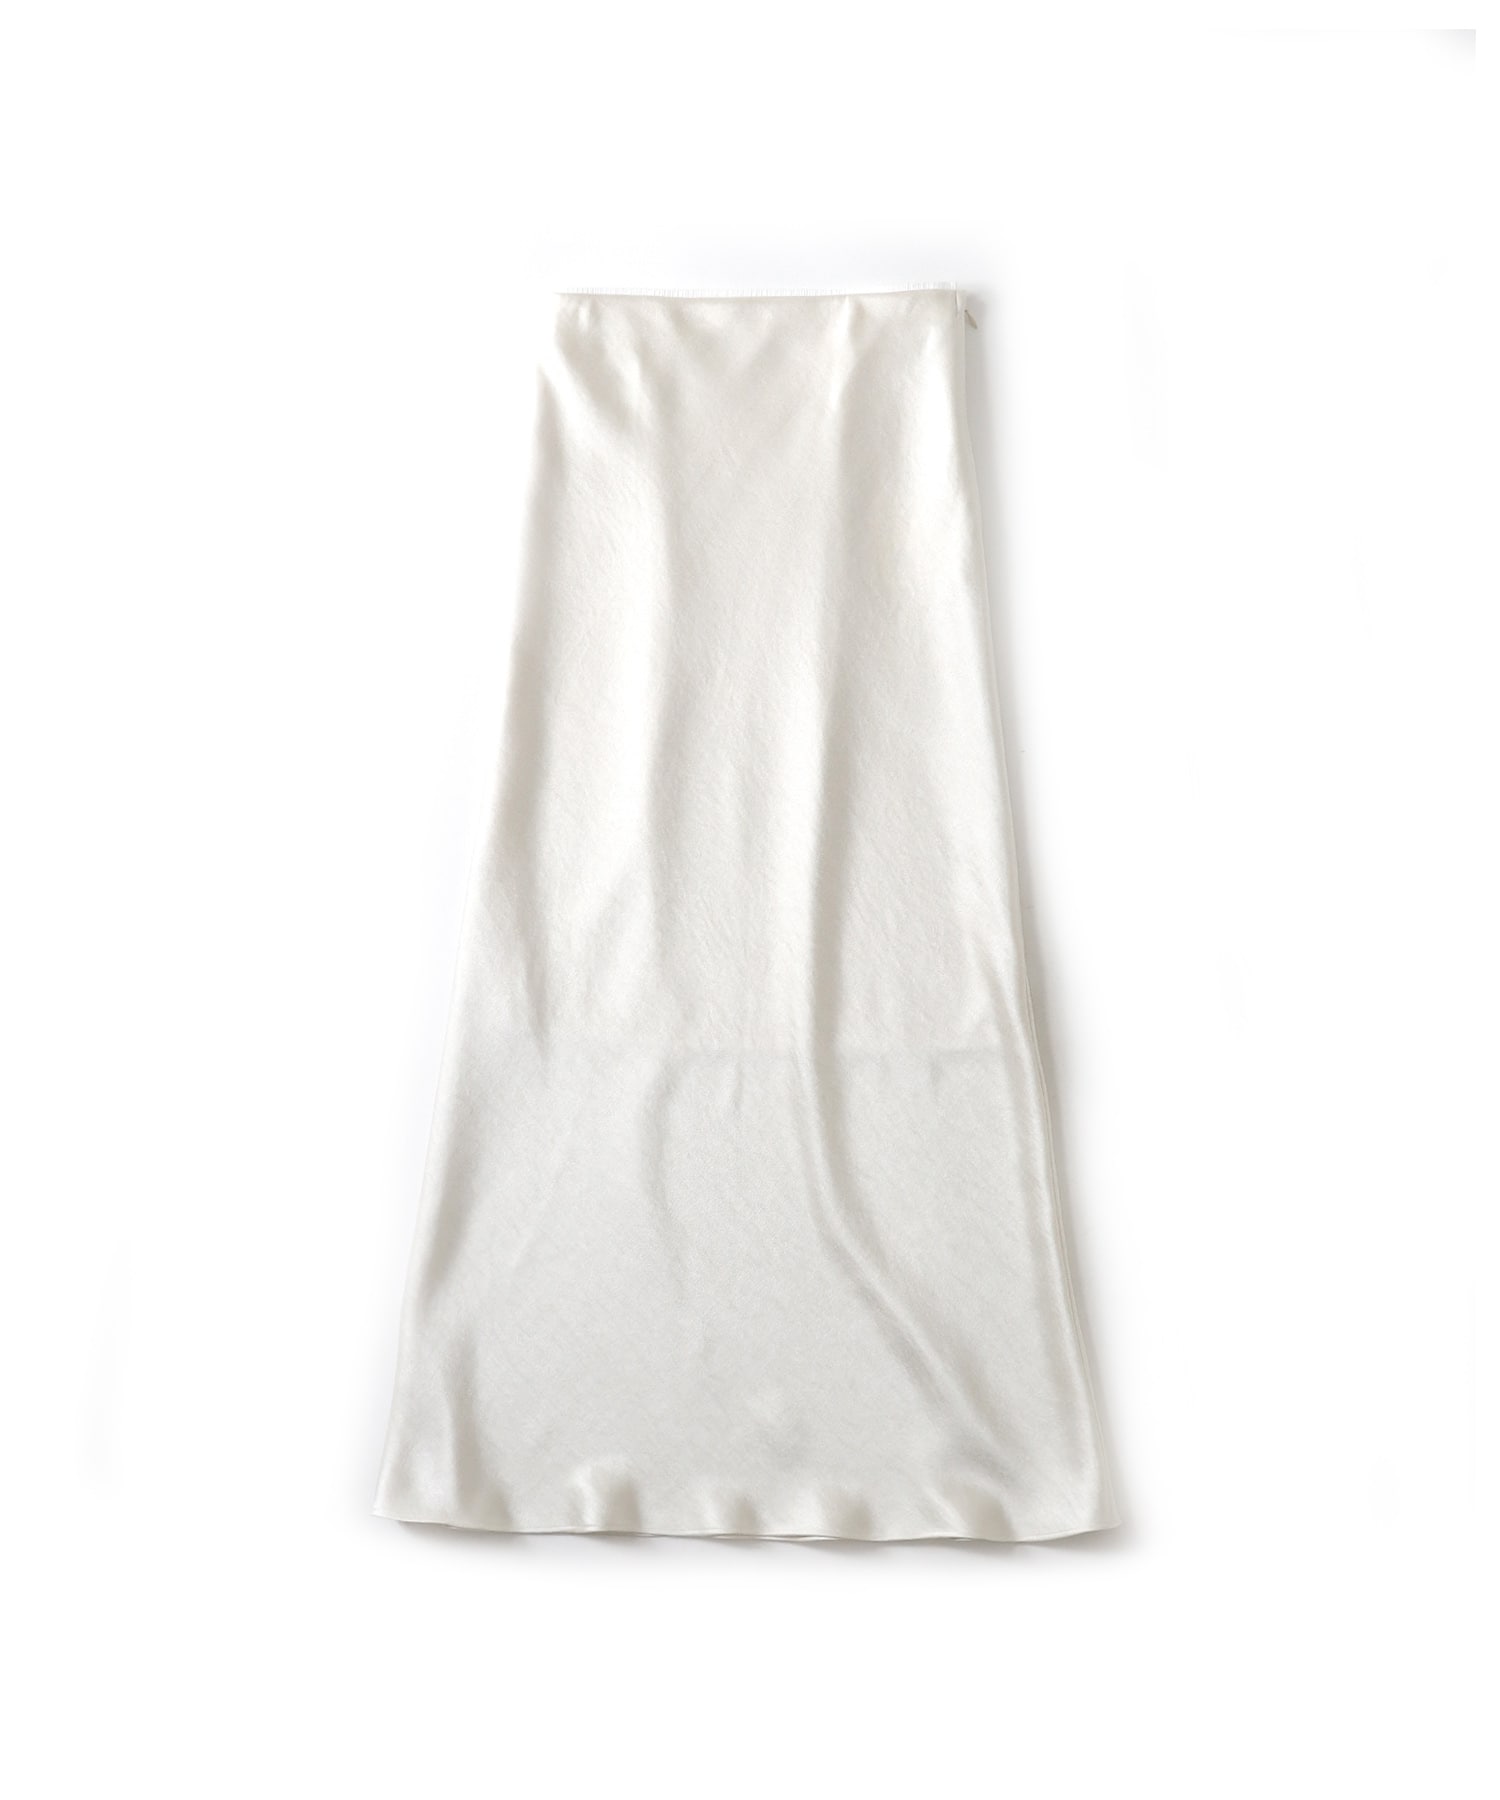 vintage like satin flare skirt | AND ON JIONE STORE（アンドオン